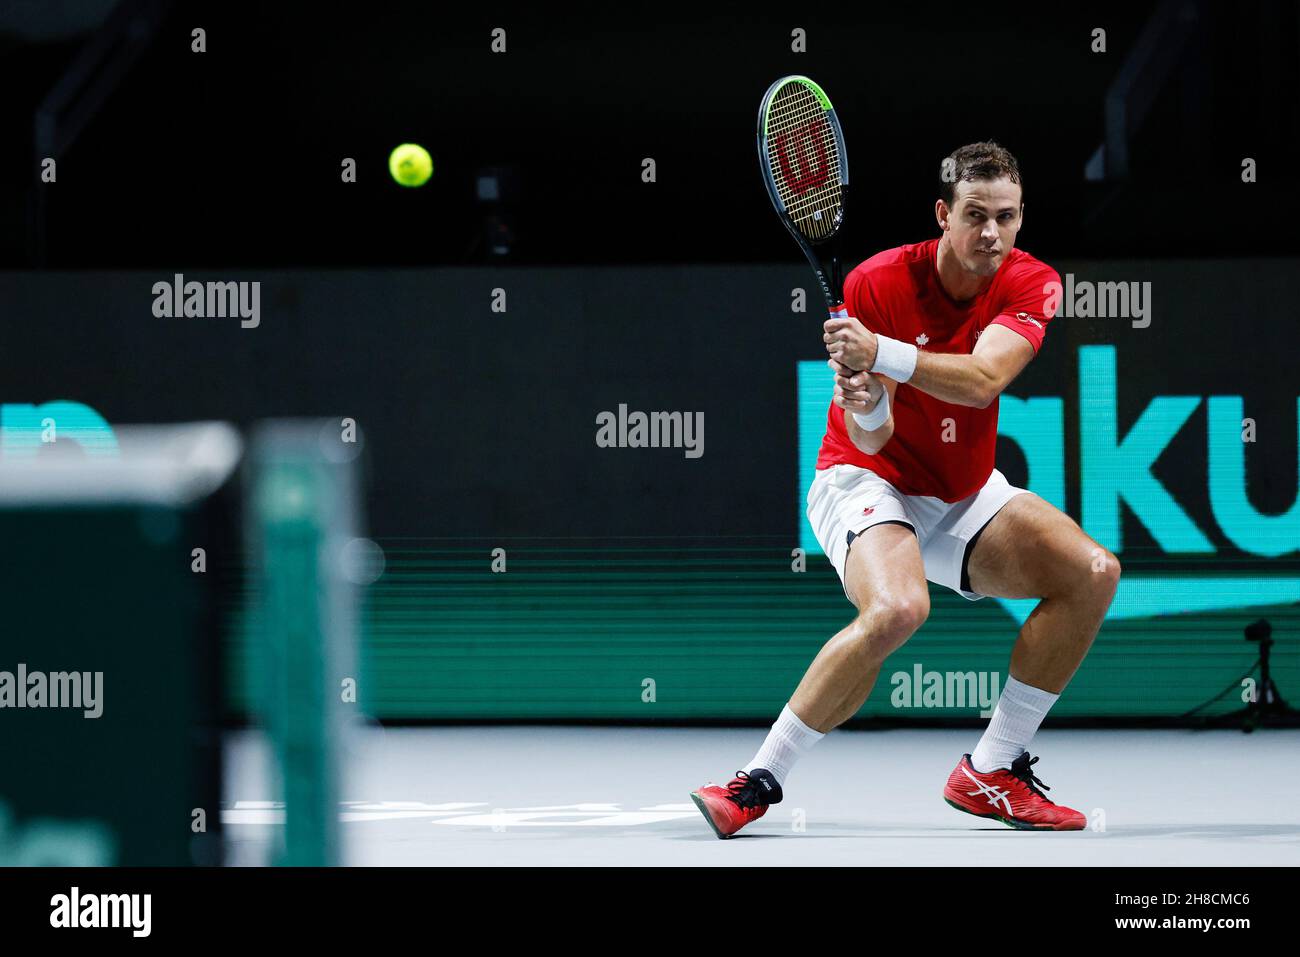 Vasek Pospisil of Canada during the Davis Cup 2021, Group B tennis match between Canada and Kazakhstan on November 28, 2021 at Madrid Arena in Madrid, Spain - Photo: Oscar Barroso/DPPI/LiveMedia Stock Photo